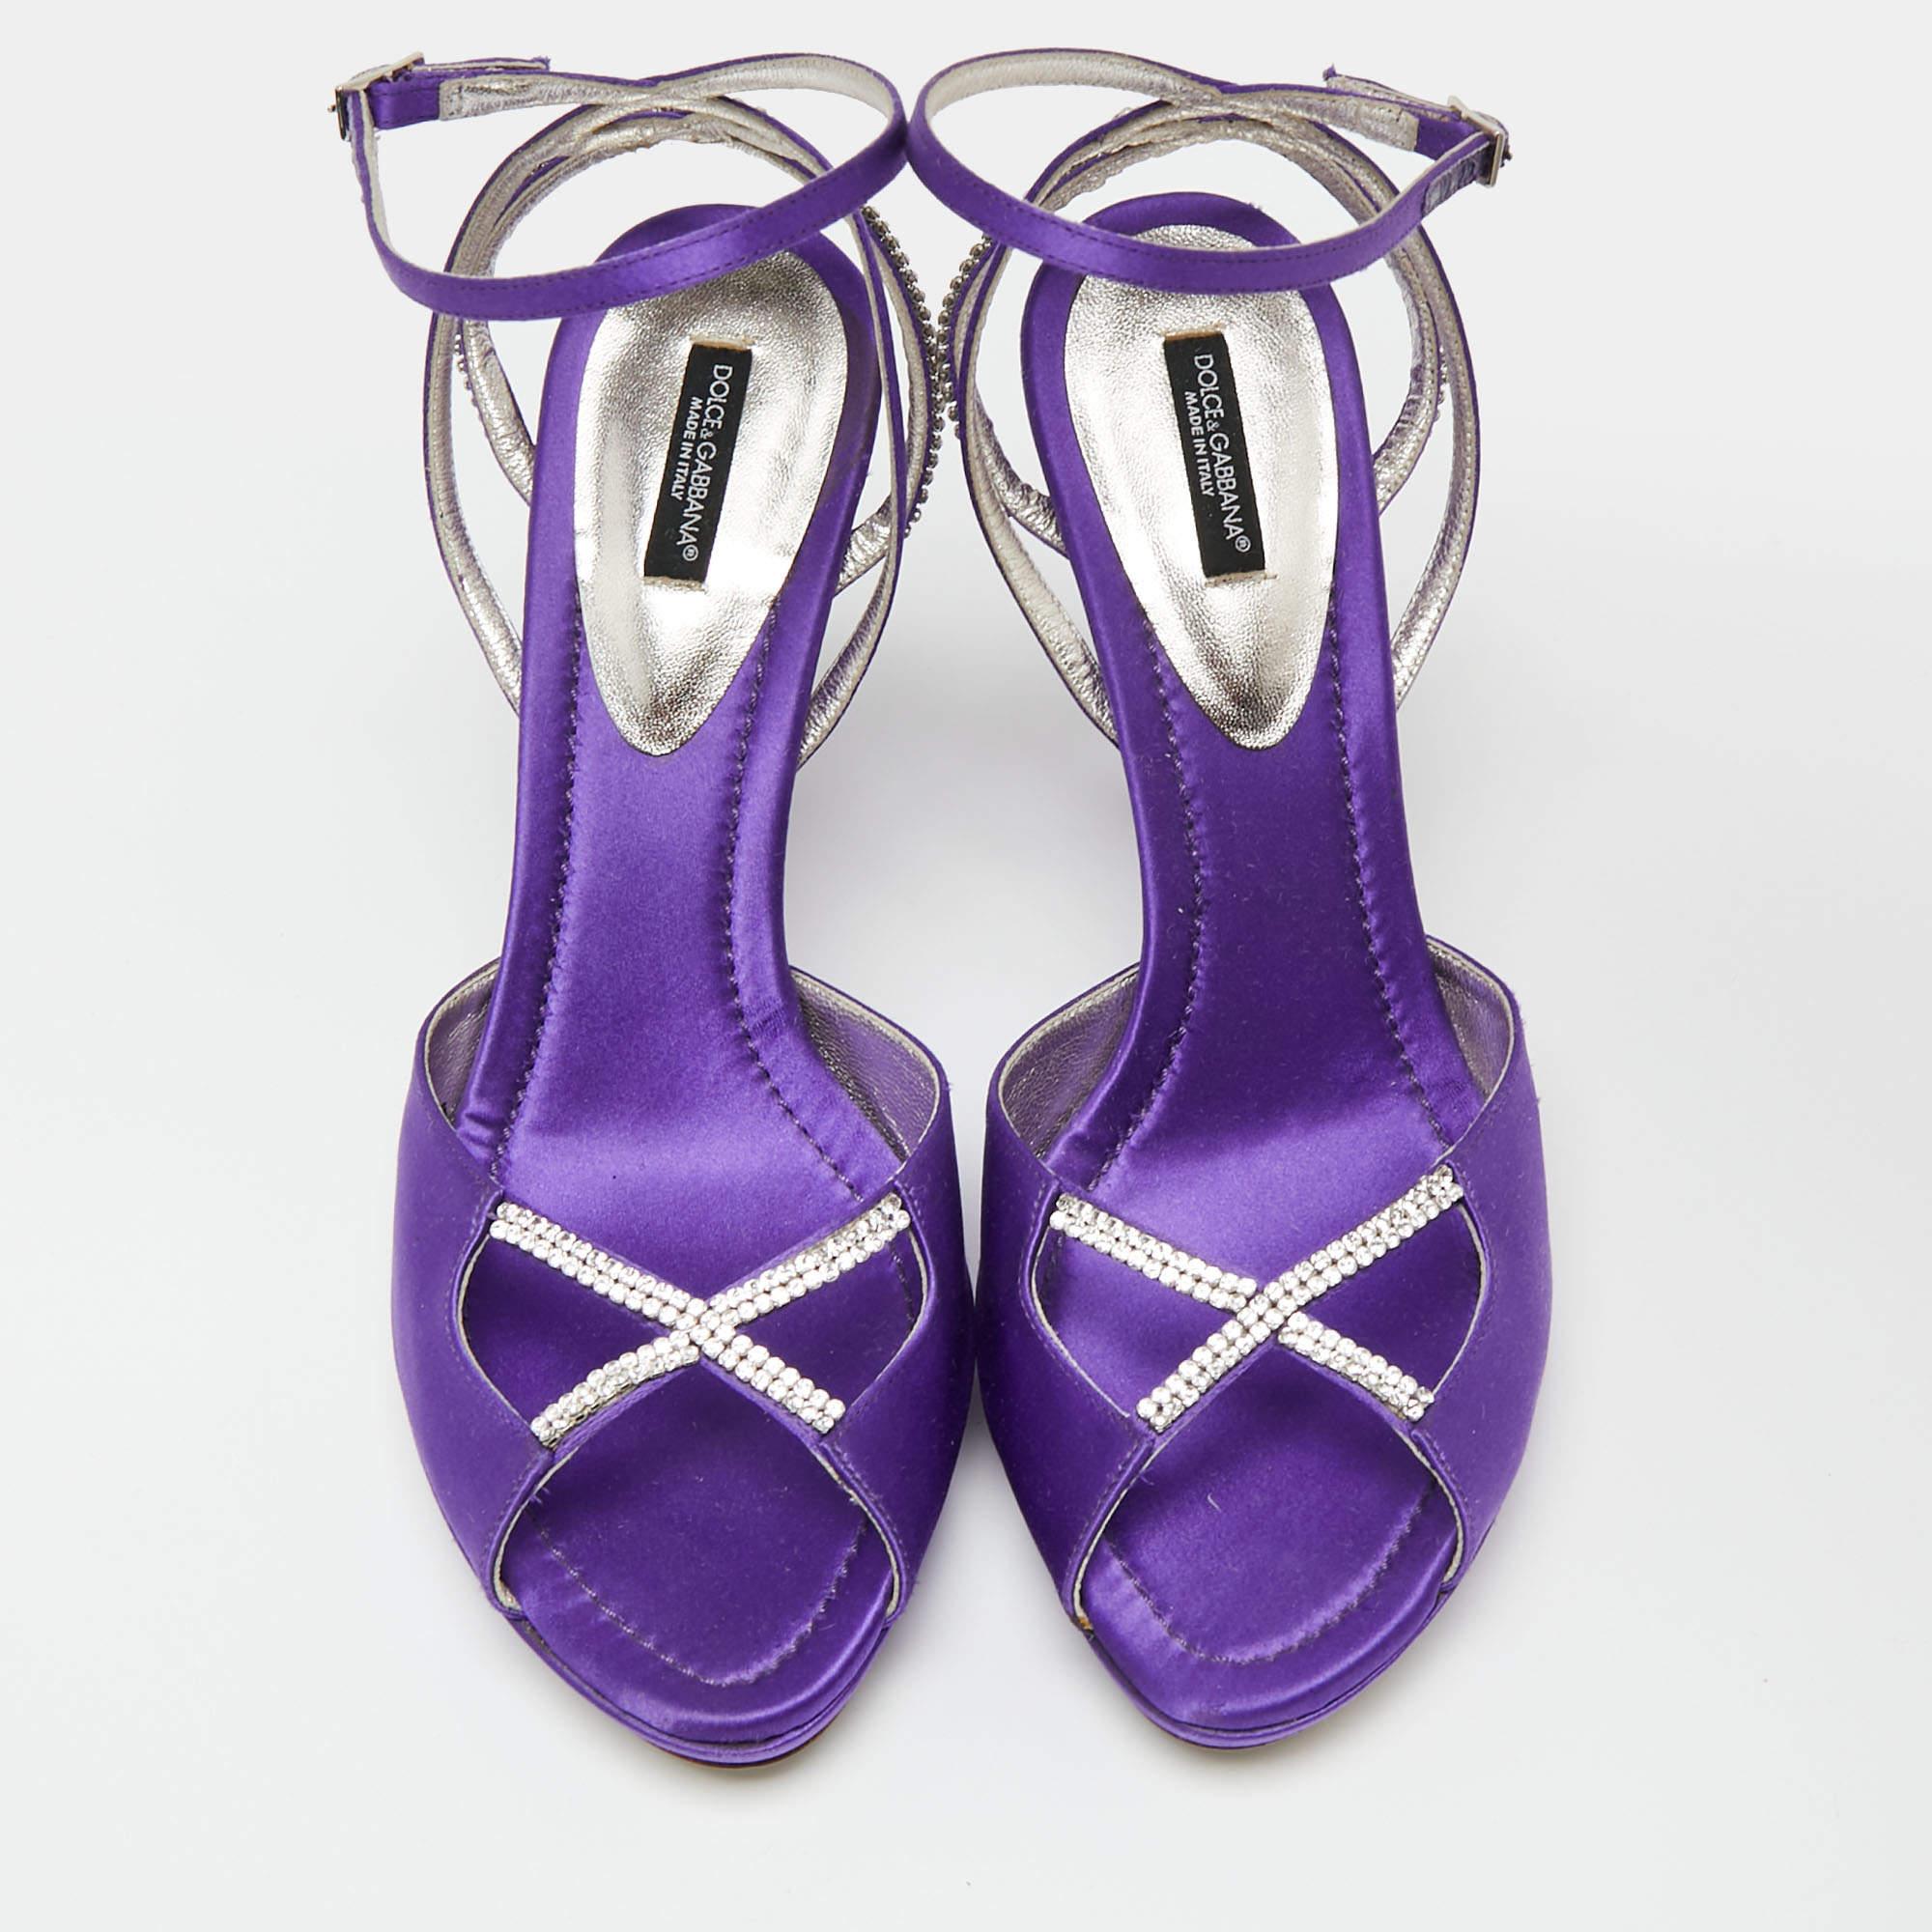 These sandals from the House of Dolce & Gabbana will add a chic touch to your outfit. They are created using purple satin, which is elevated with crystal embellishments. They flaunt open toes, an ankle strap, and slim heels. Stay stylish all day